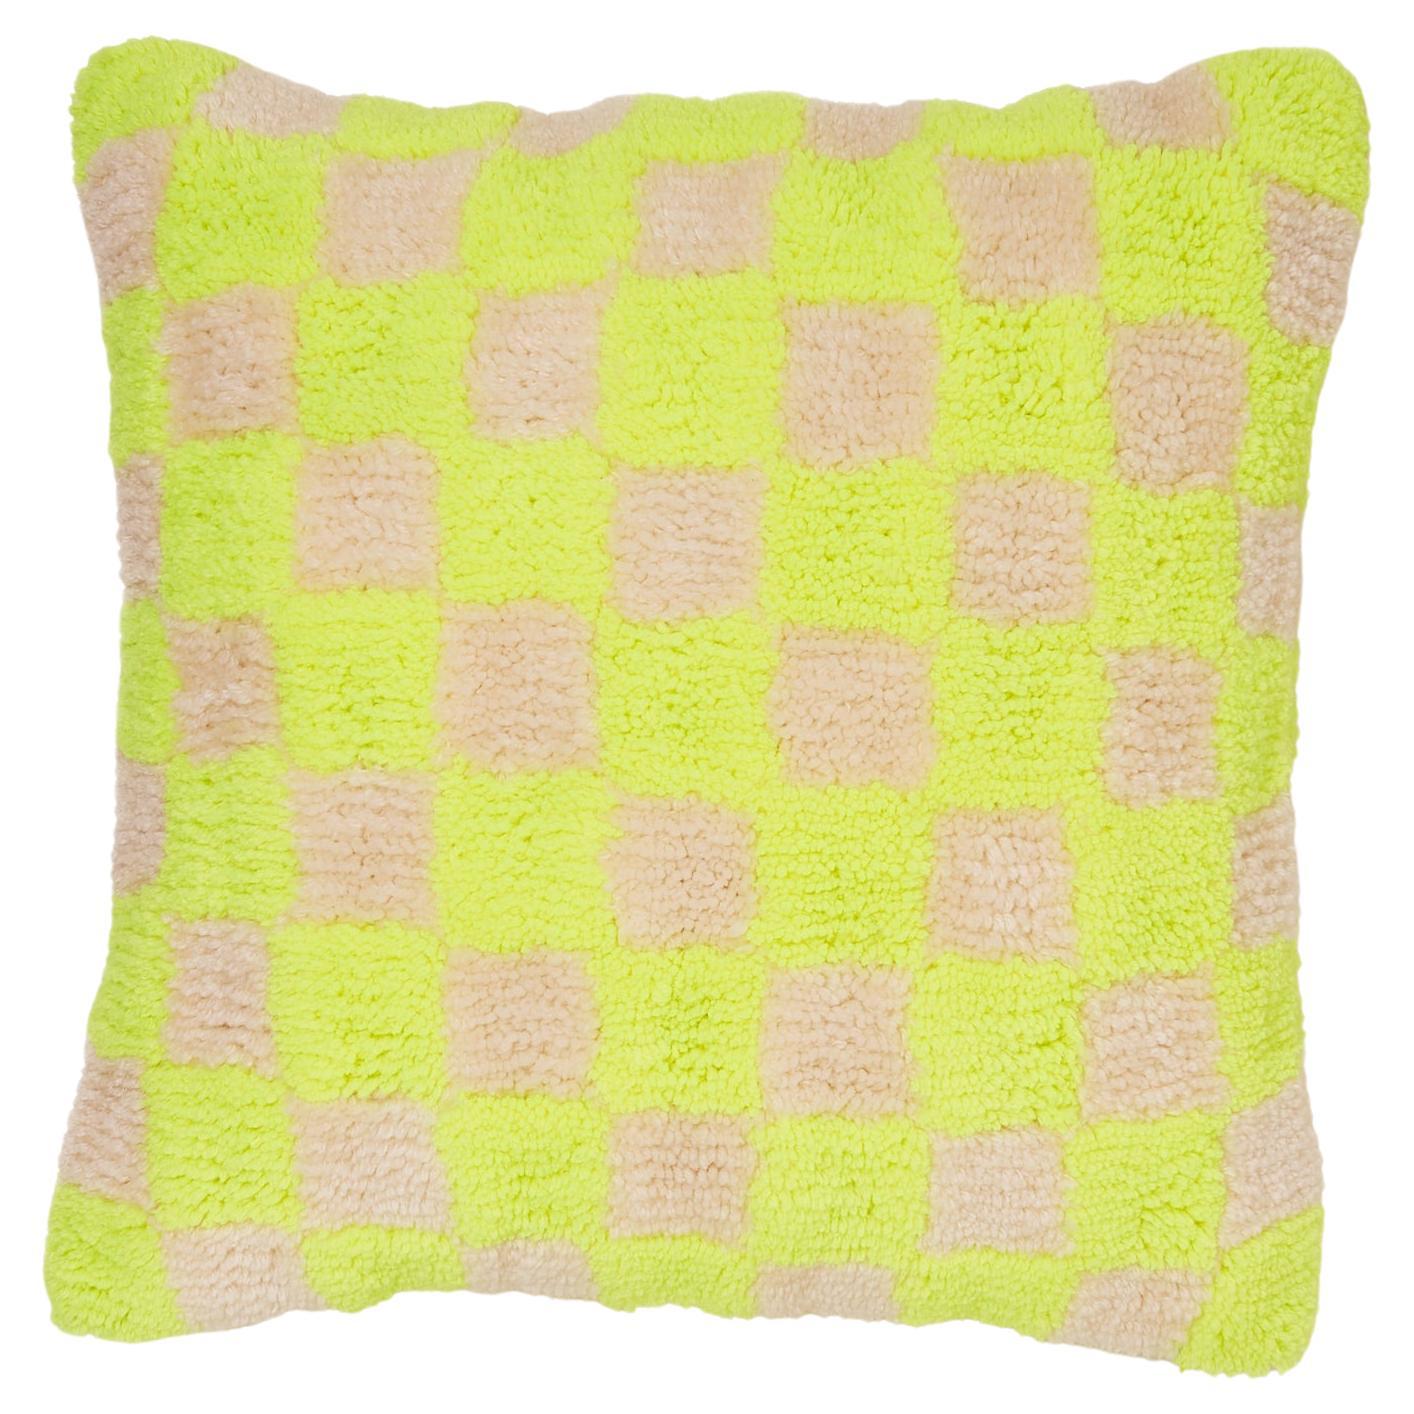 Neon Yellow Check Tufted Square Pillow For Sale